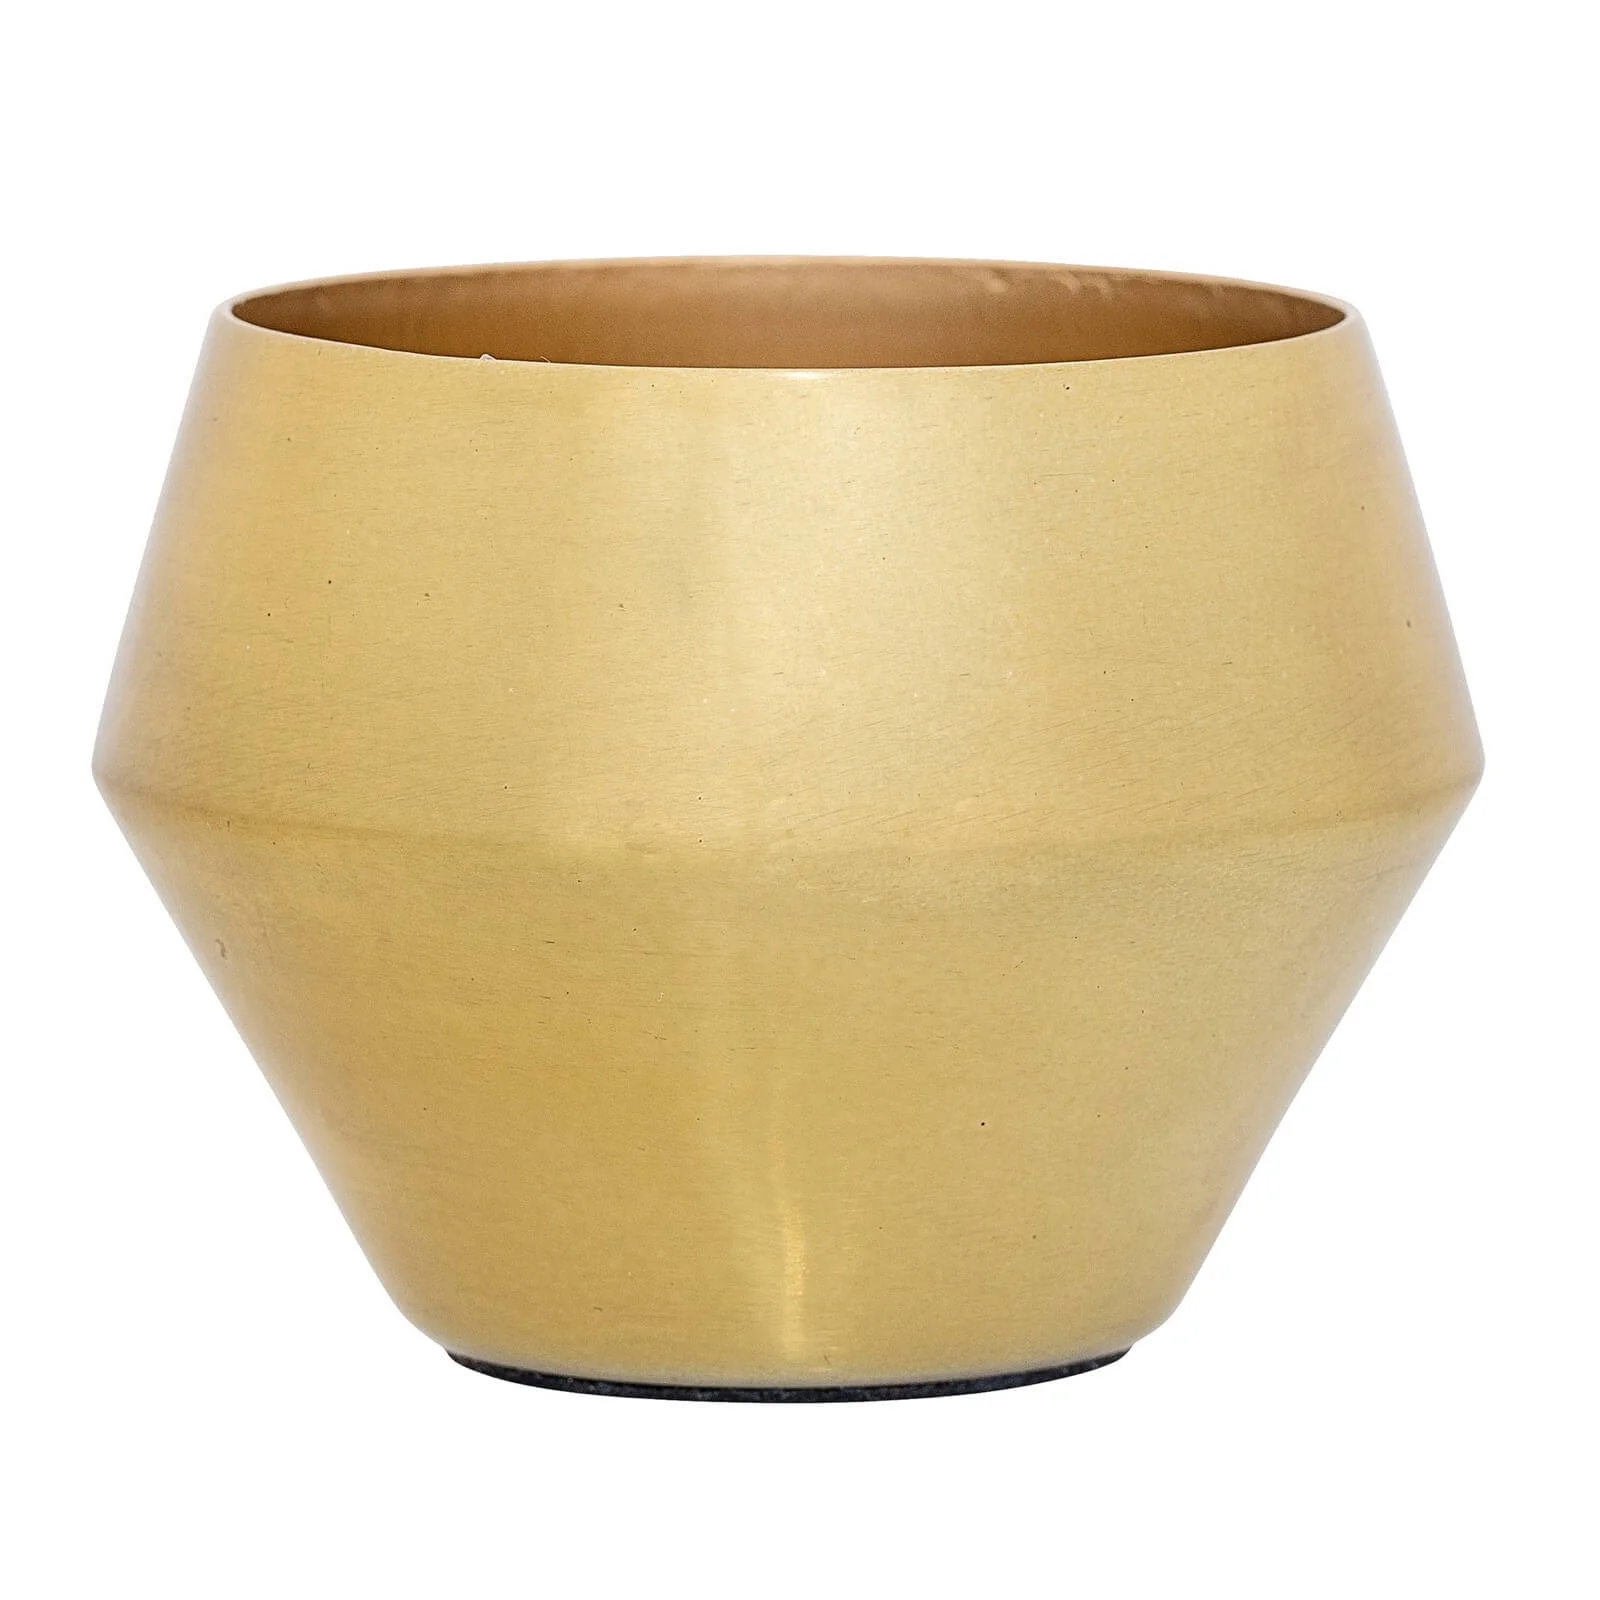 Bloomingville Votive and Candle Holder - Gold Image 1